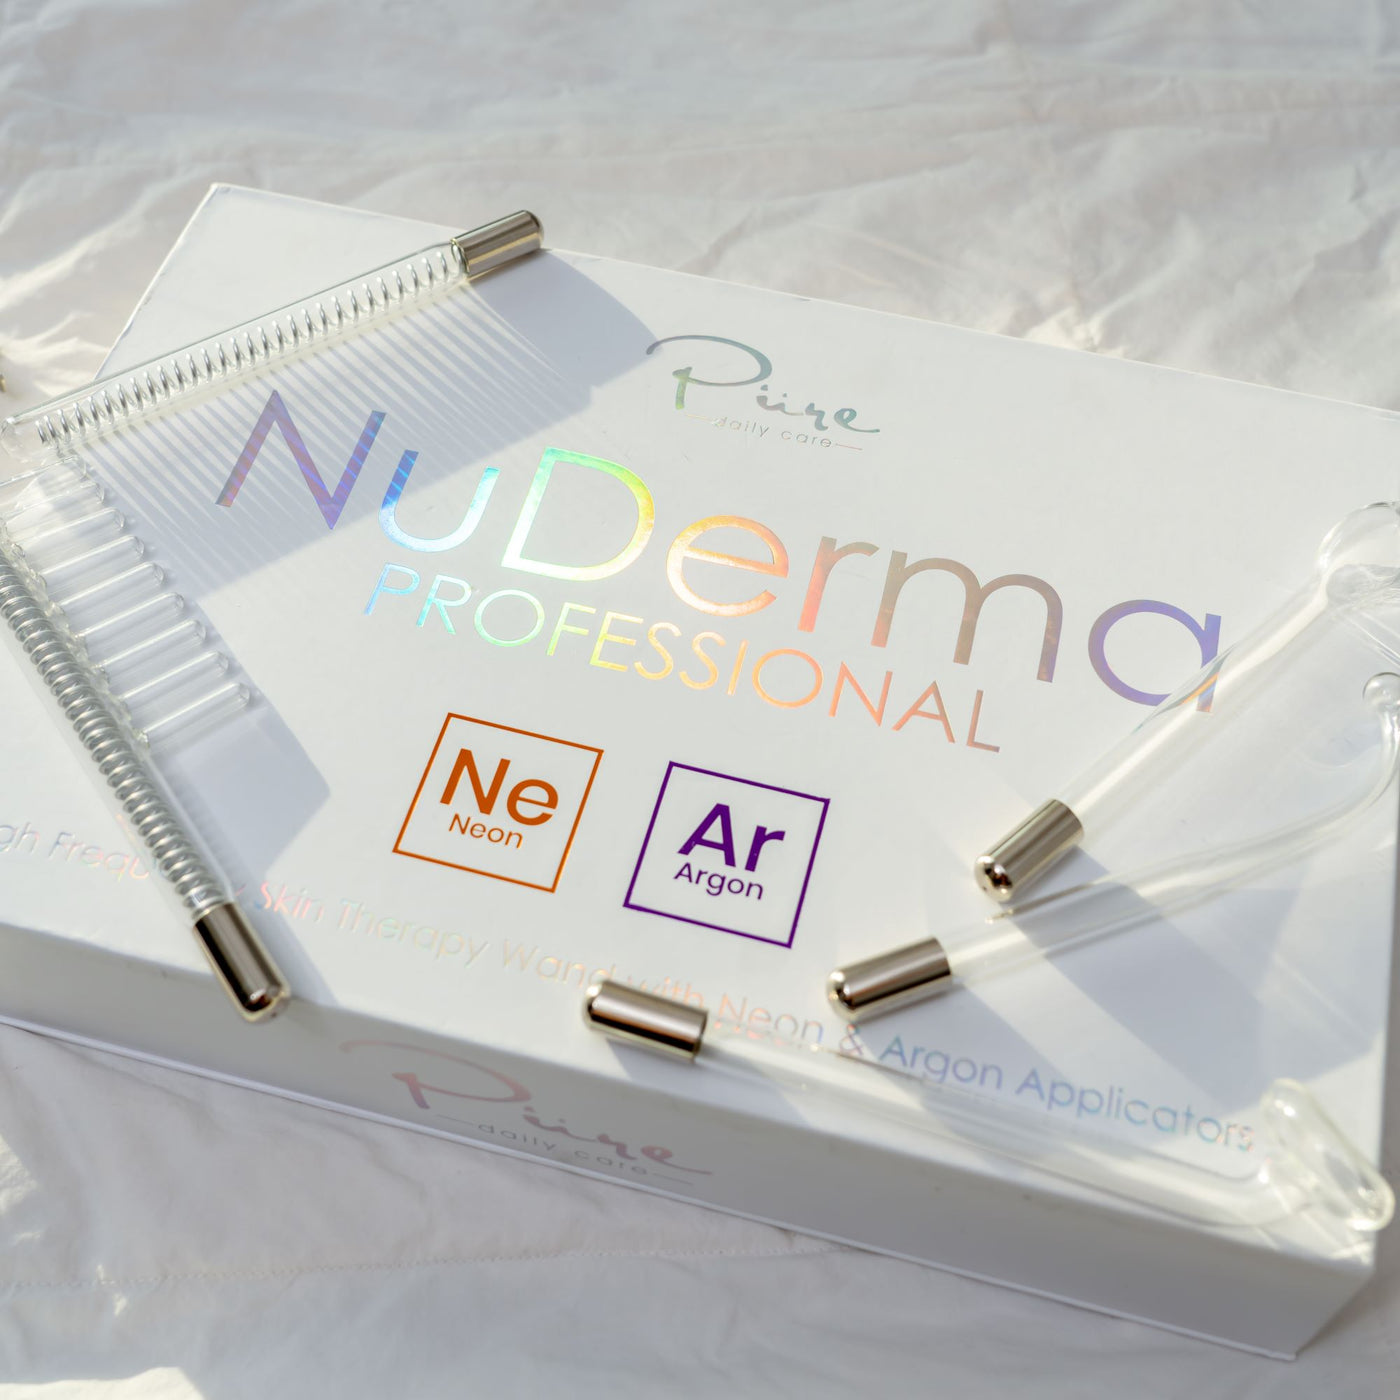 NuDerma Professional High Frequency